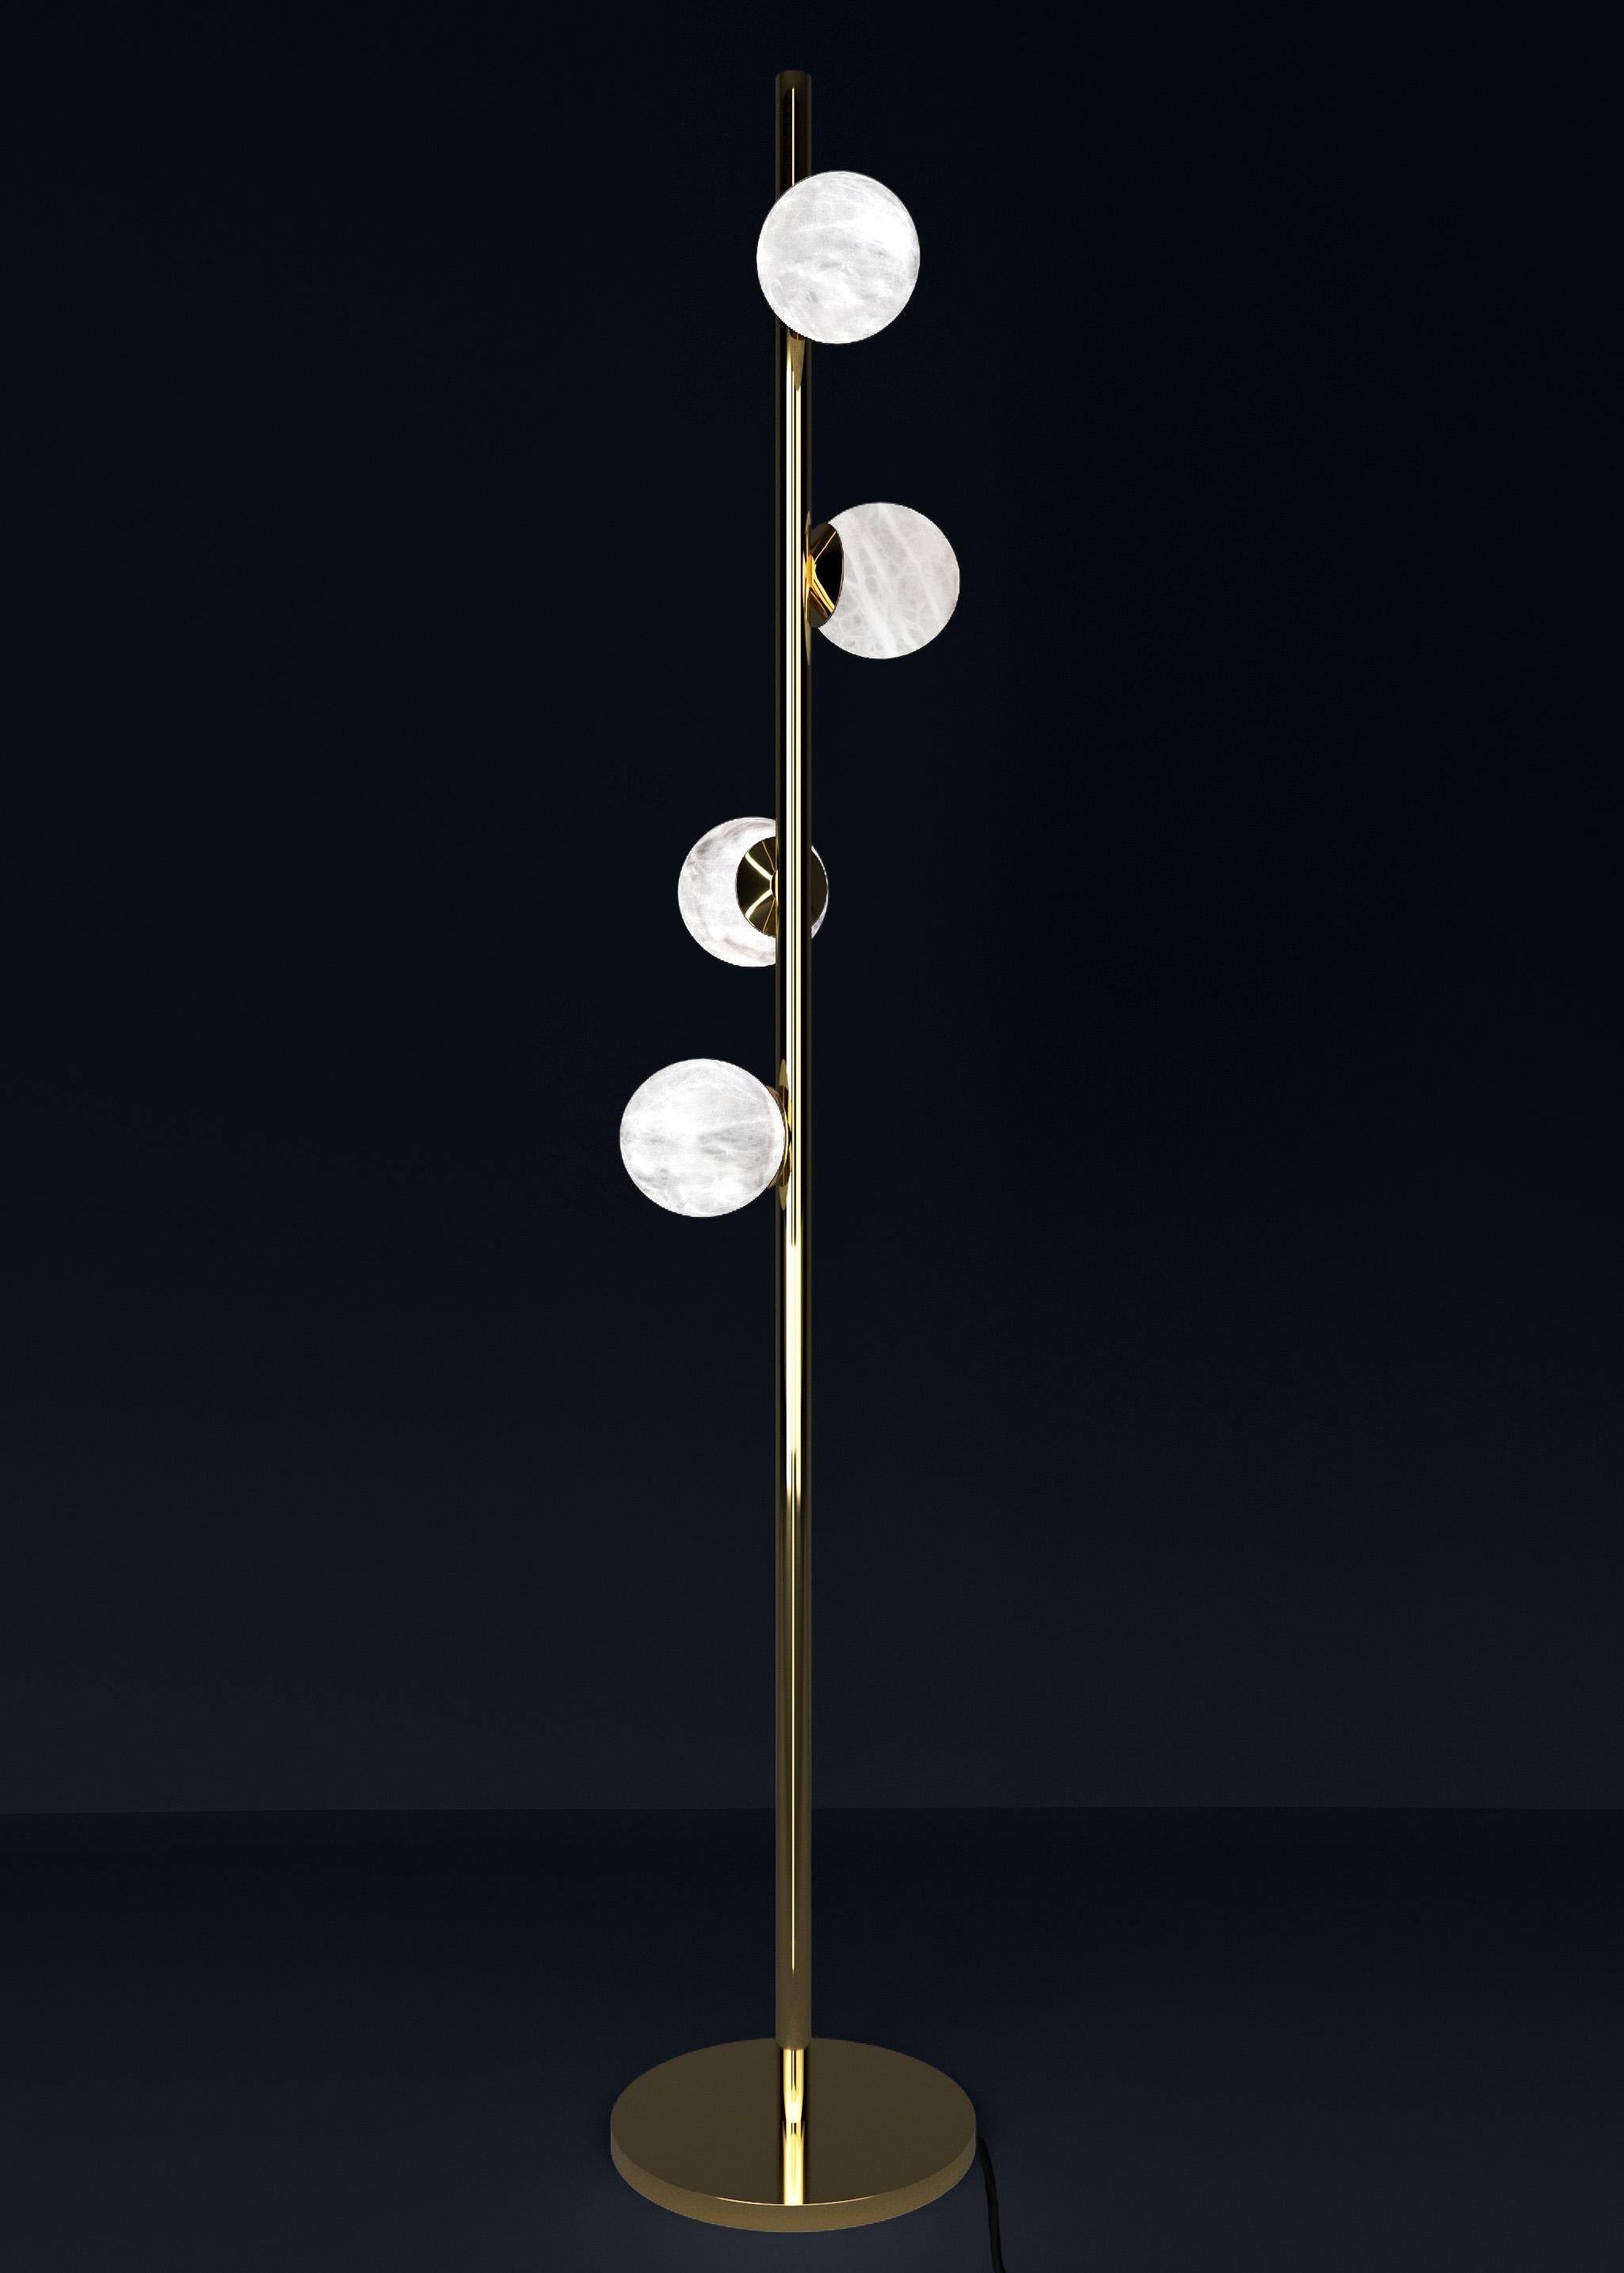 Ofione Shiny Gold Metal Floor Lamp by Alabastro Italiano
Dimensions: D 50 x W 50 x H 170 cm.
Materials: White alabaster and metal.

Available in different finishes: Shiny Silver, Bronze, Brushed Brass, Matte Black, Ruggine of Florence, Brushed